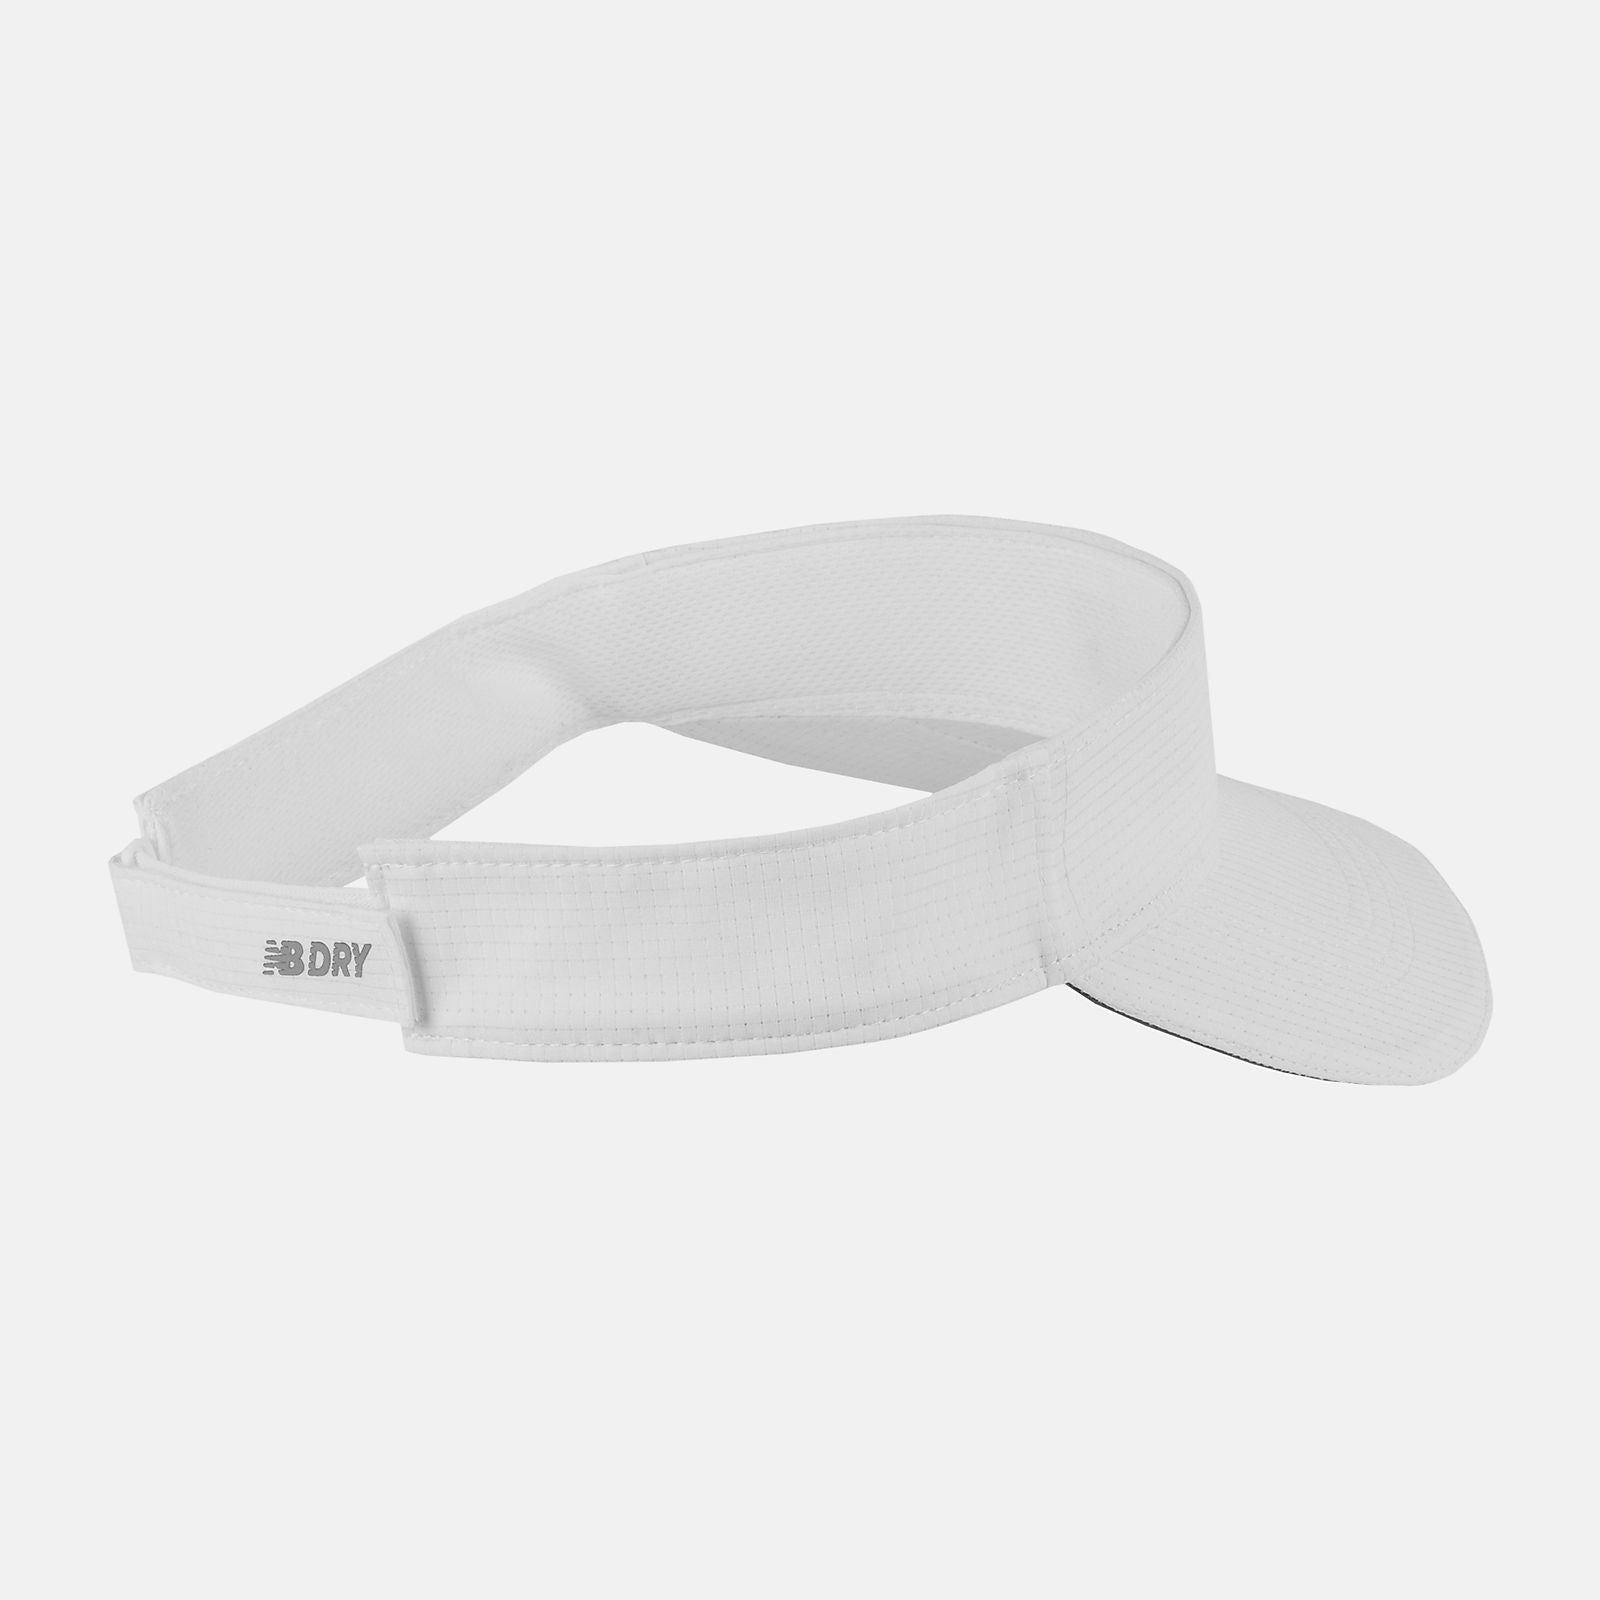 NEW BALANCE Performance Visor in White LAH21105 O/S WHITE FROM EIGHTYWINGOLD - OFFICIAL BRAND PARTNER